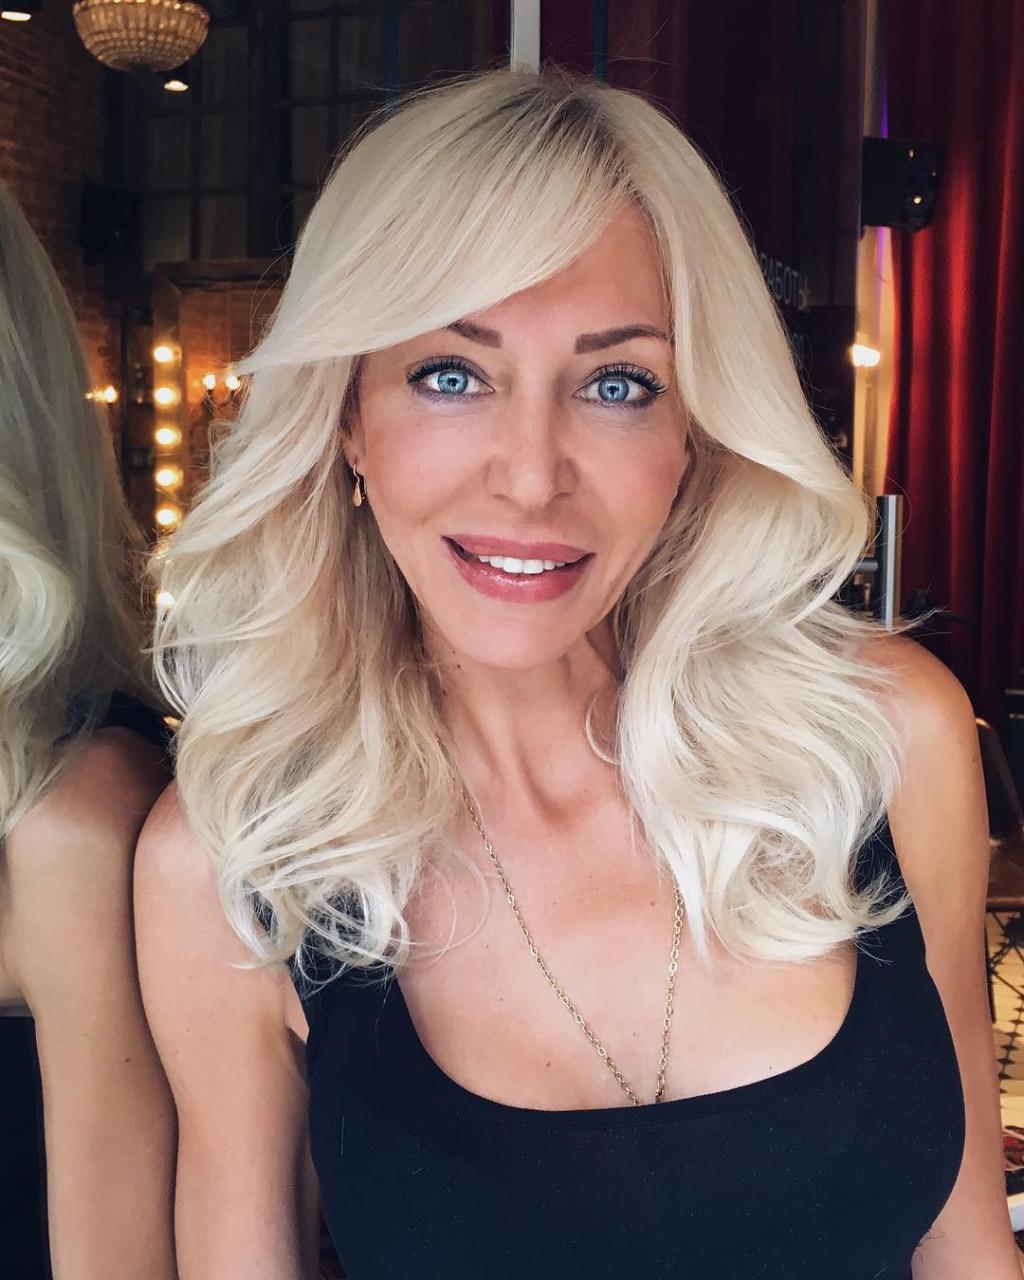 Haircuts after 50 years for blond hair 2019-2020